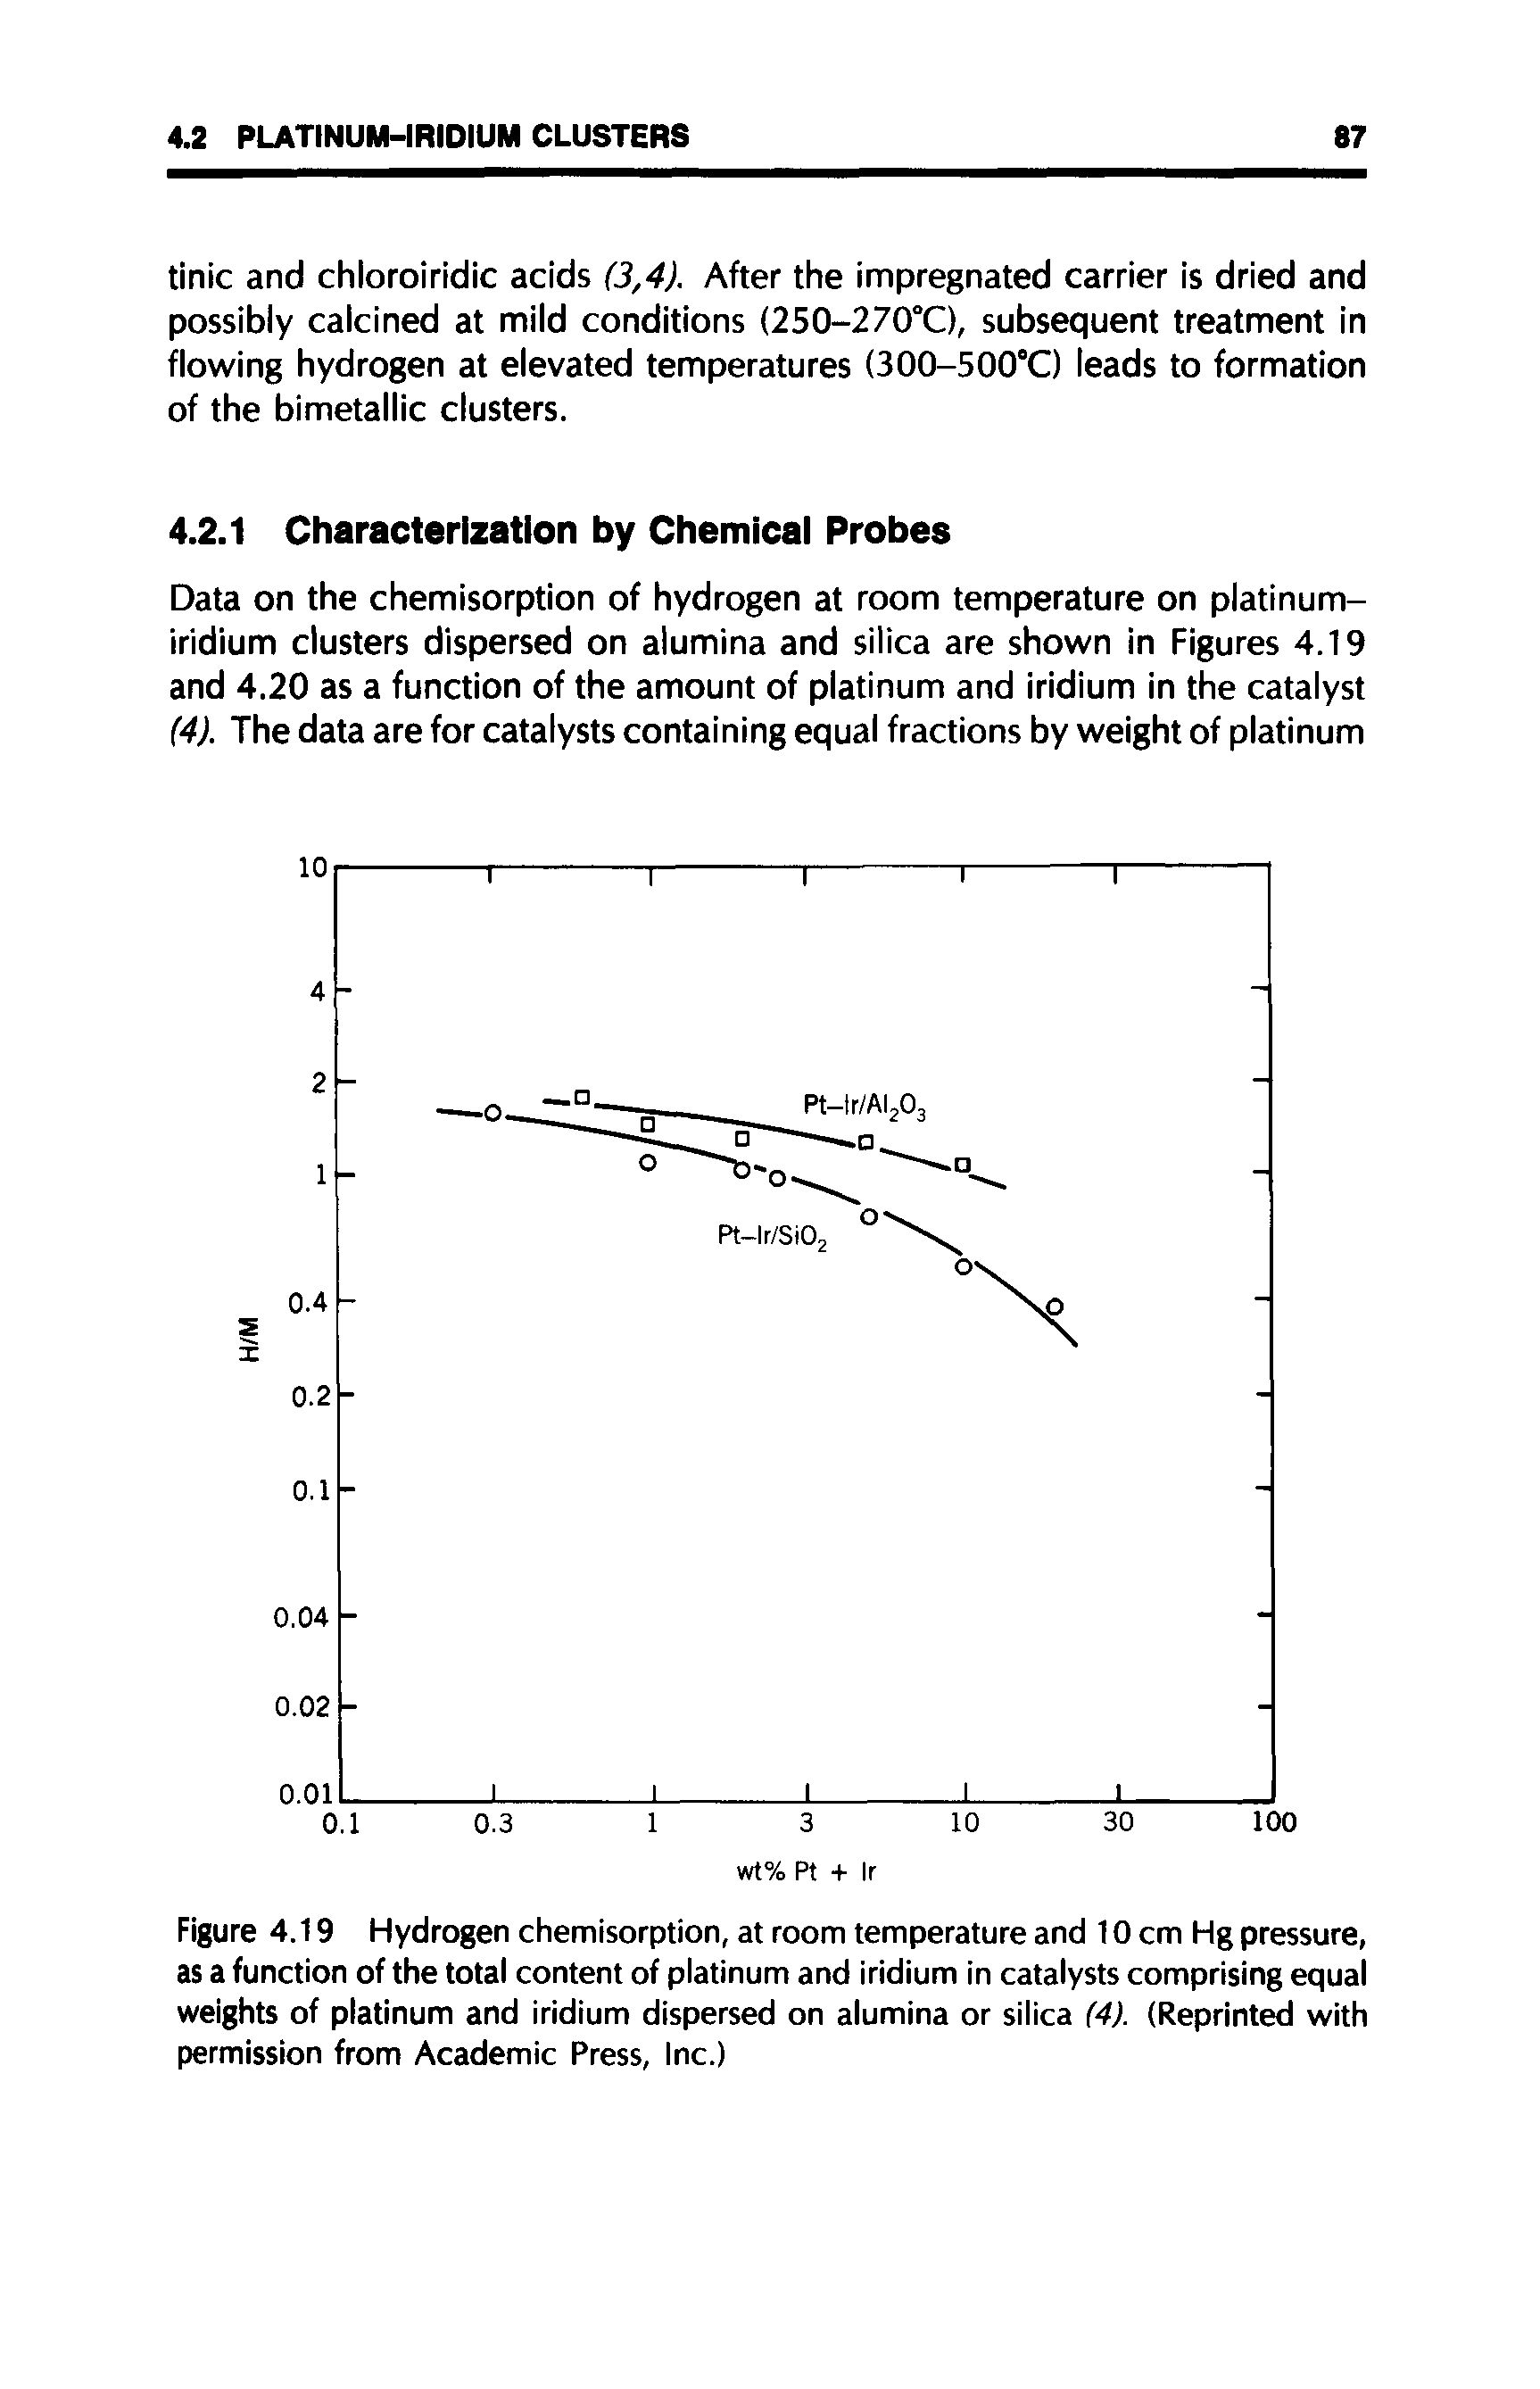 Figure 4.19 Hydrogen chemisorption, at room temperature and 10 cm Hg pressure, as a function of the total content of platinum and iridium in catalysts comprising equal weights of platinum and iridium dispersed on alumina or silica (4). (Reprinted with permission from Academic Press, Inc.)...